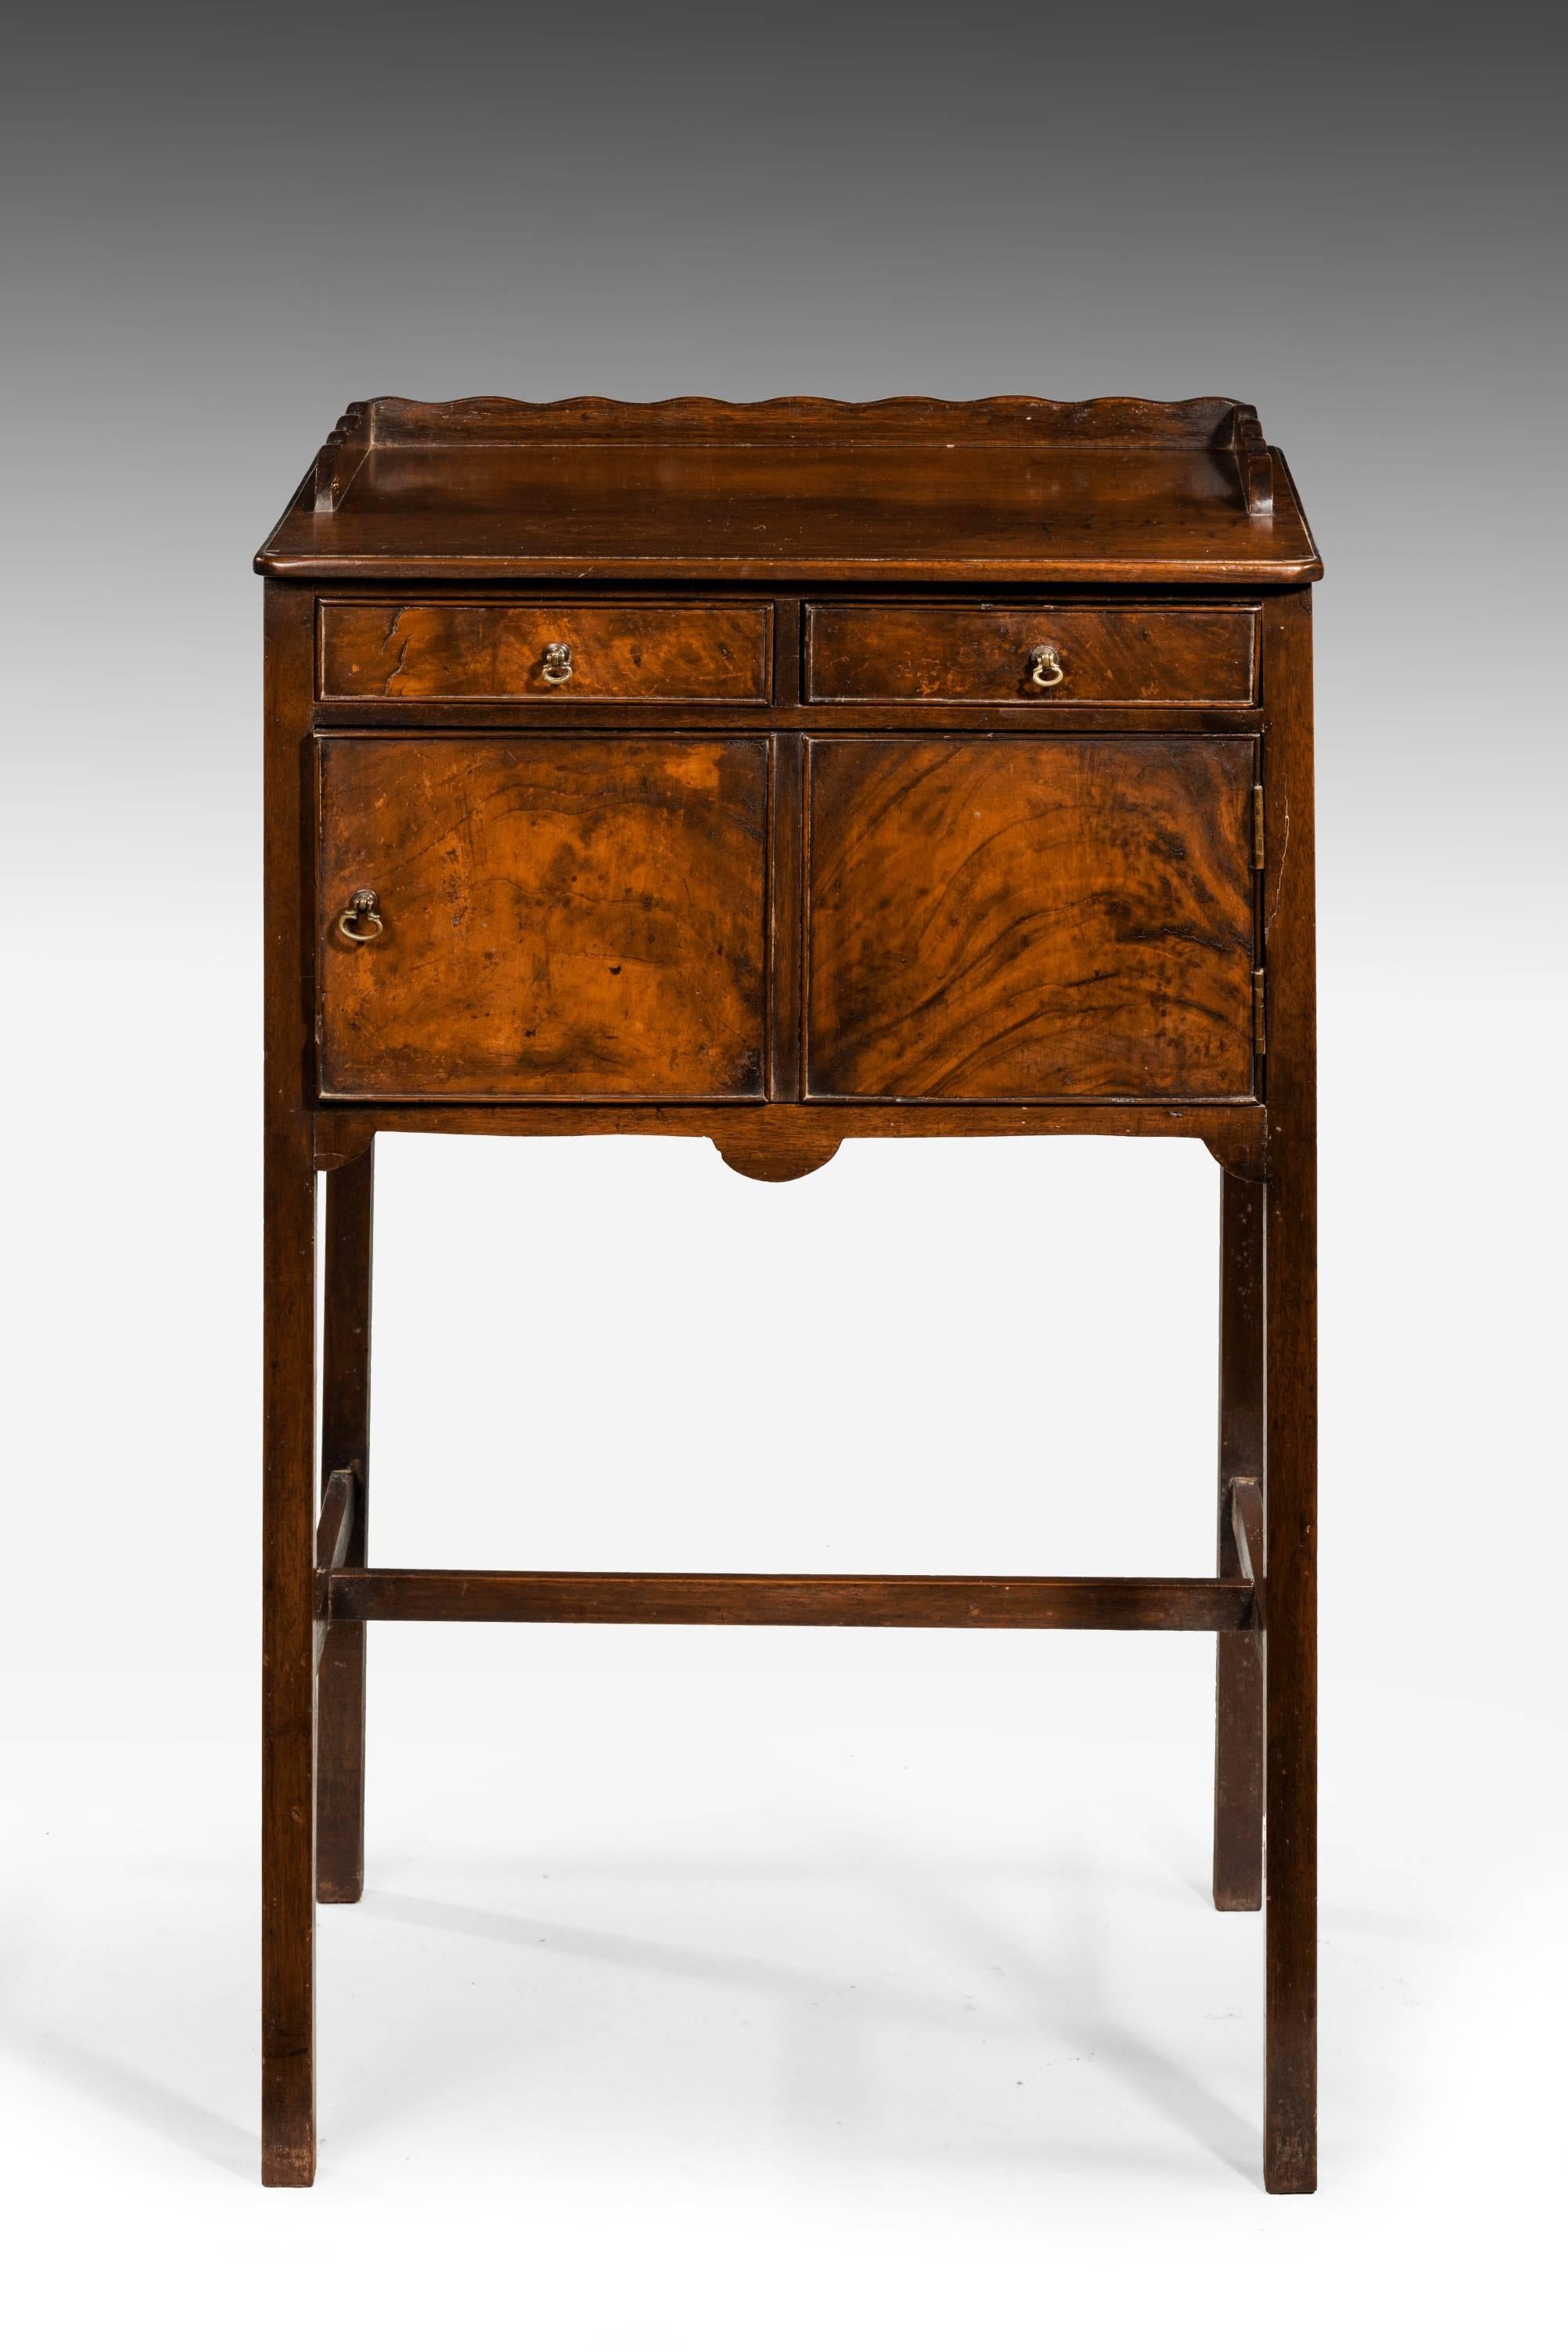 George III period mahogany side cabinet with a shaped top rail. Two slender drawers over a central cupboard. The base with H stretchers on square section supports. Very good color and polish.